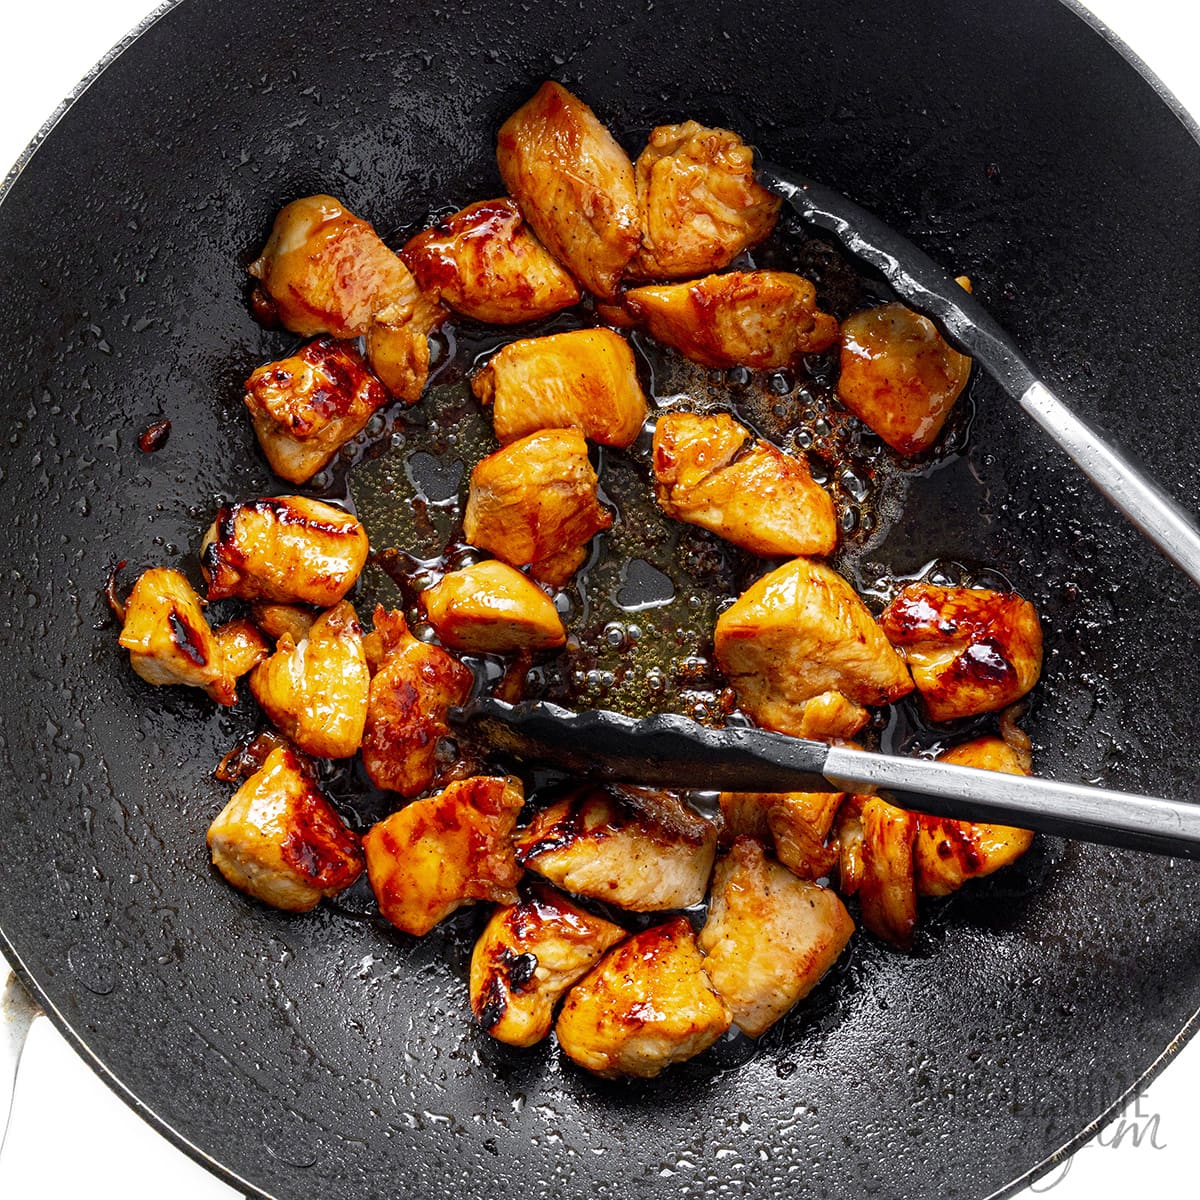 Stir fried chicken in a wok with tongs.